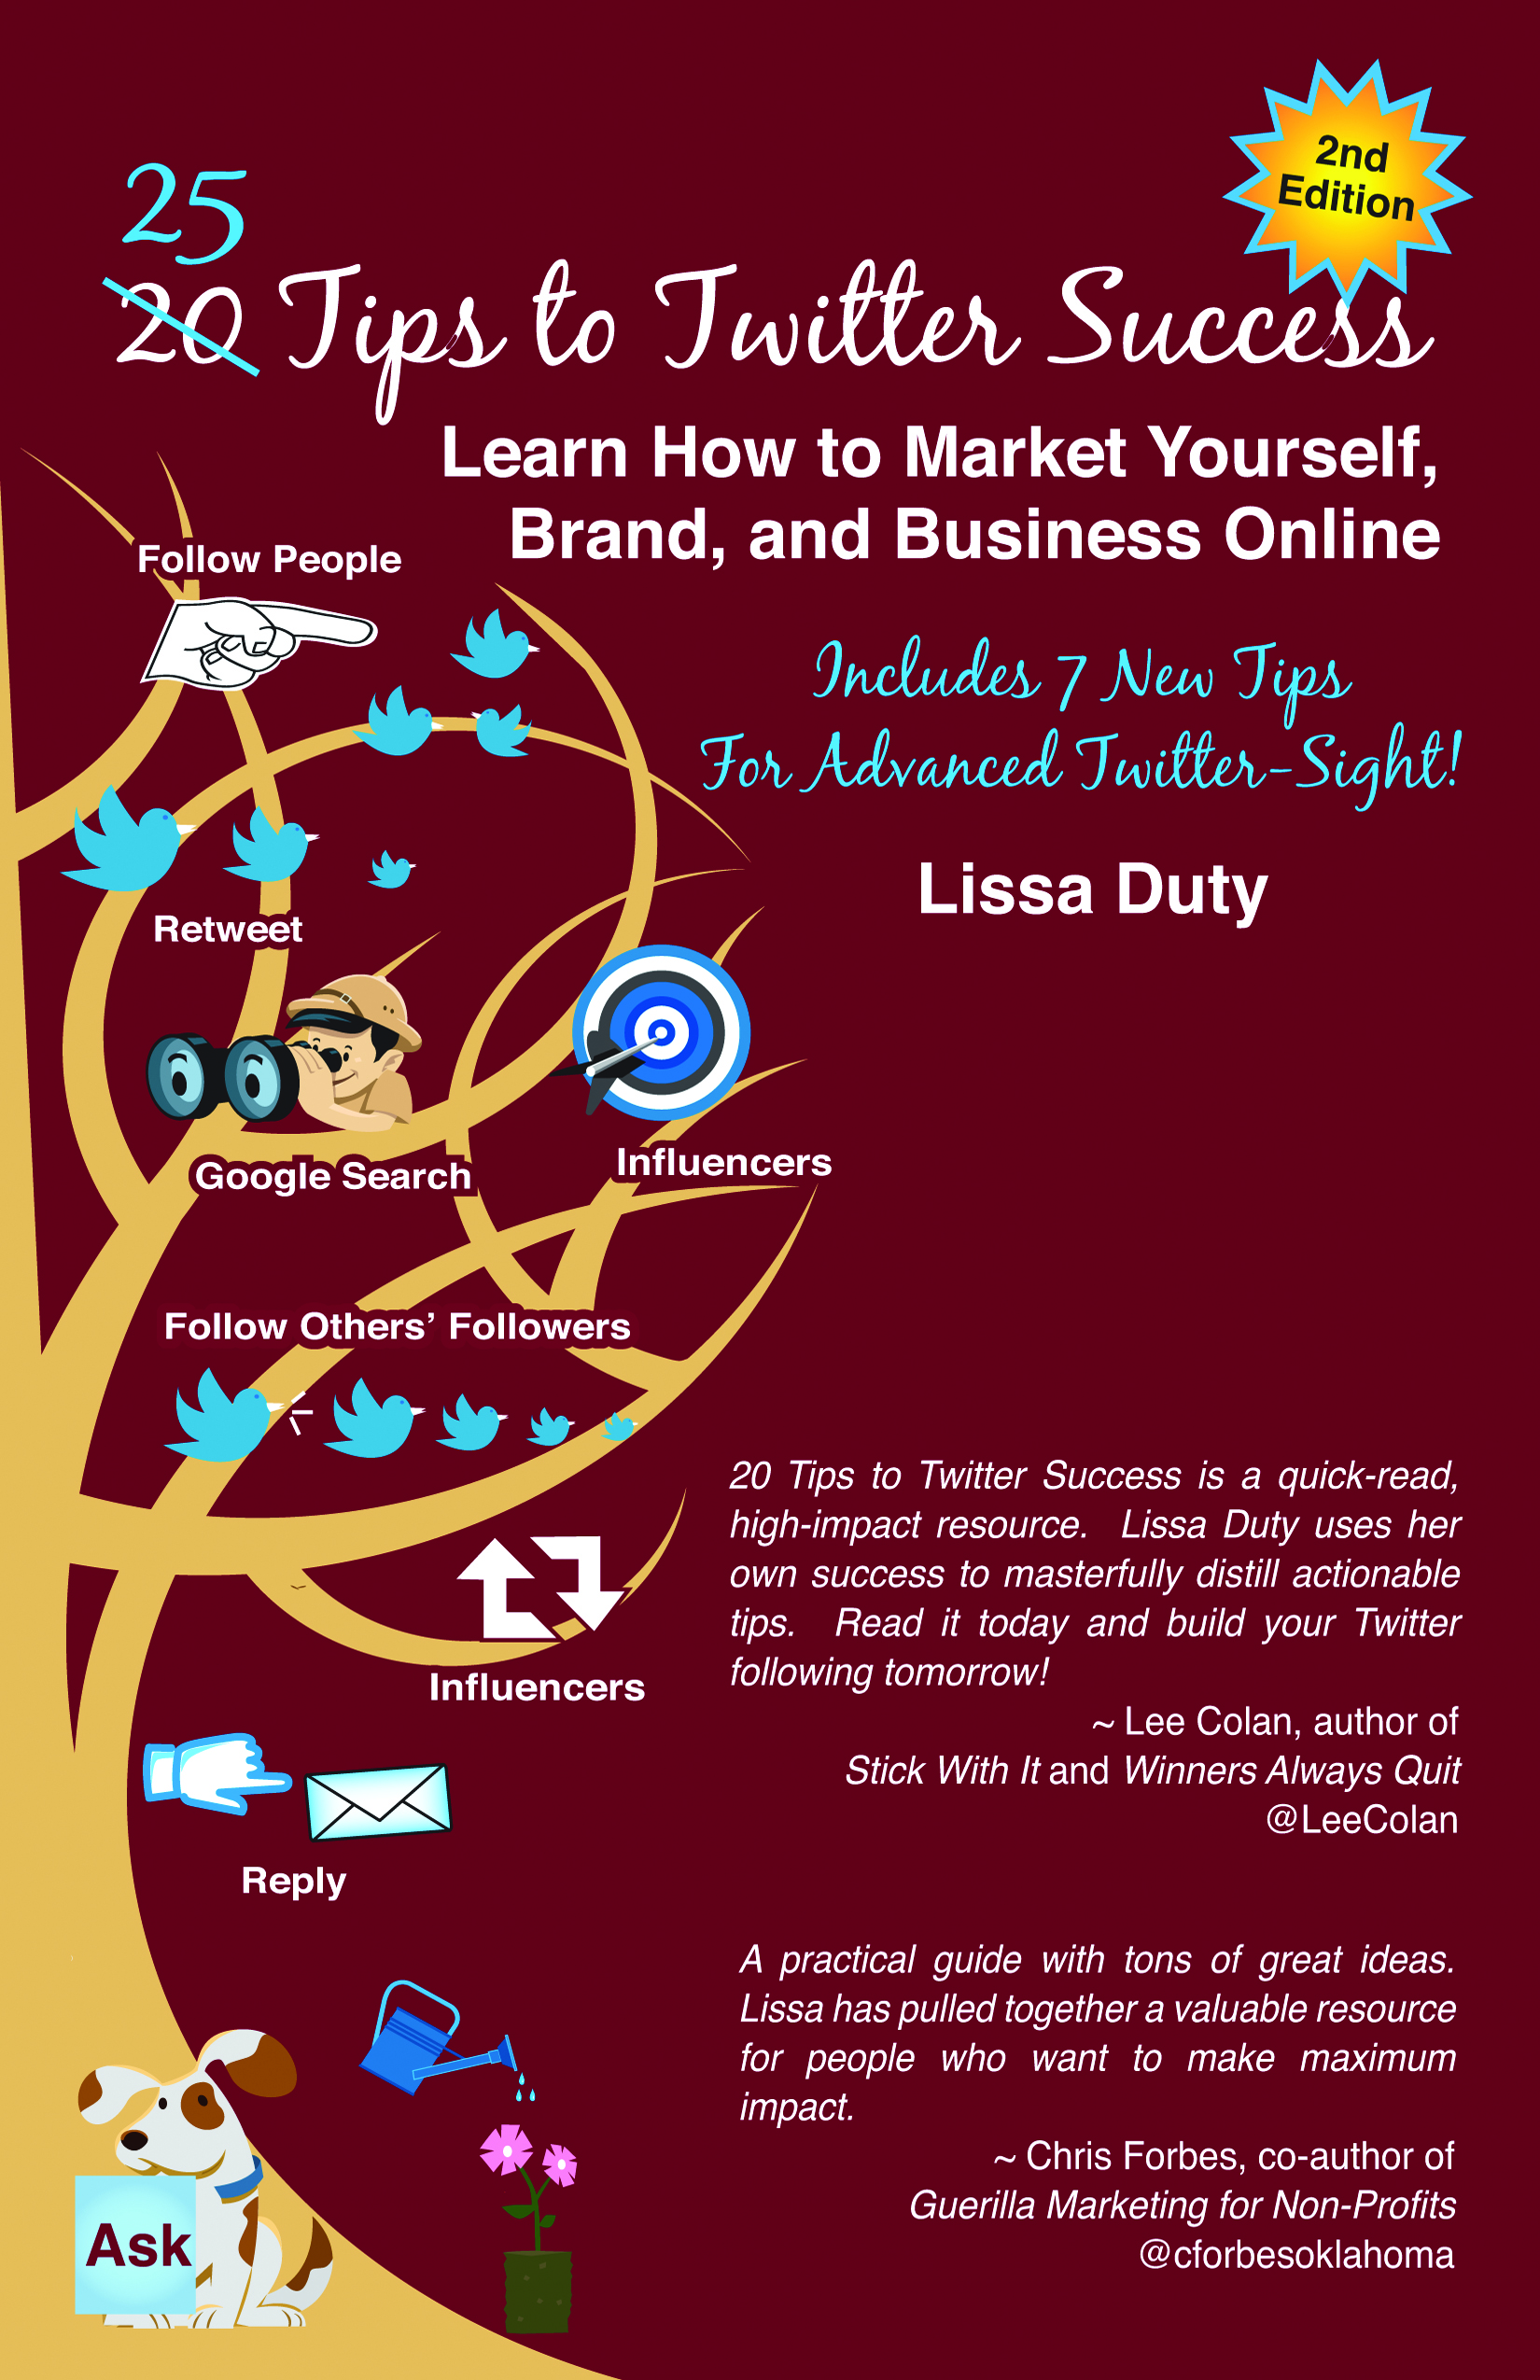 20 Tips to Twitter Success: Learn How to Market Yourself, Brand and Business Online by Lissa Duty